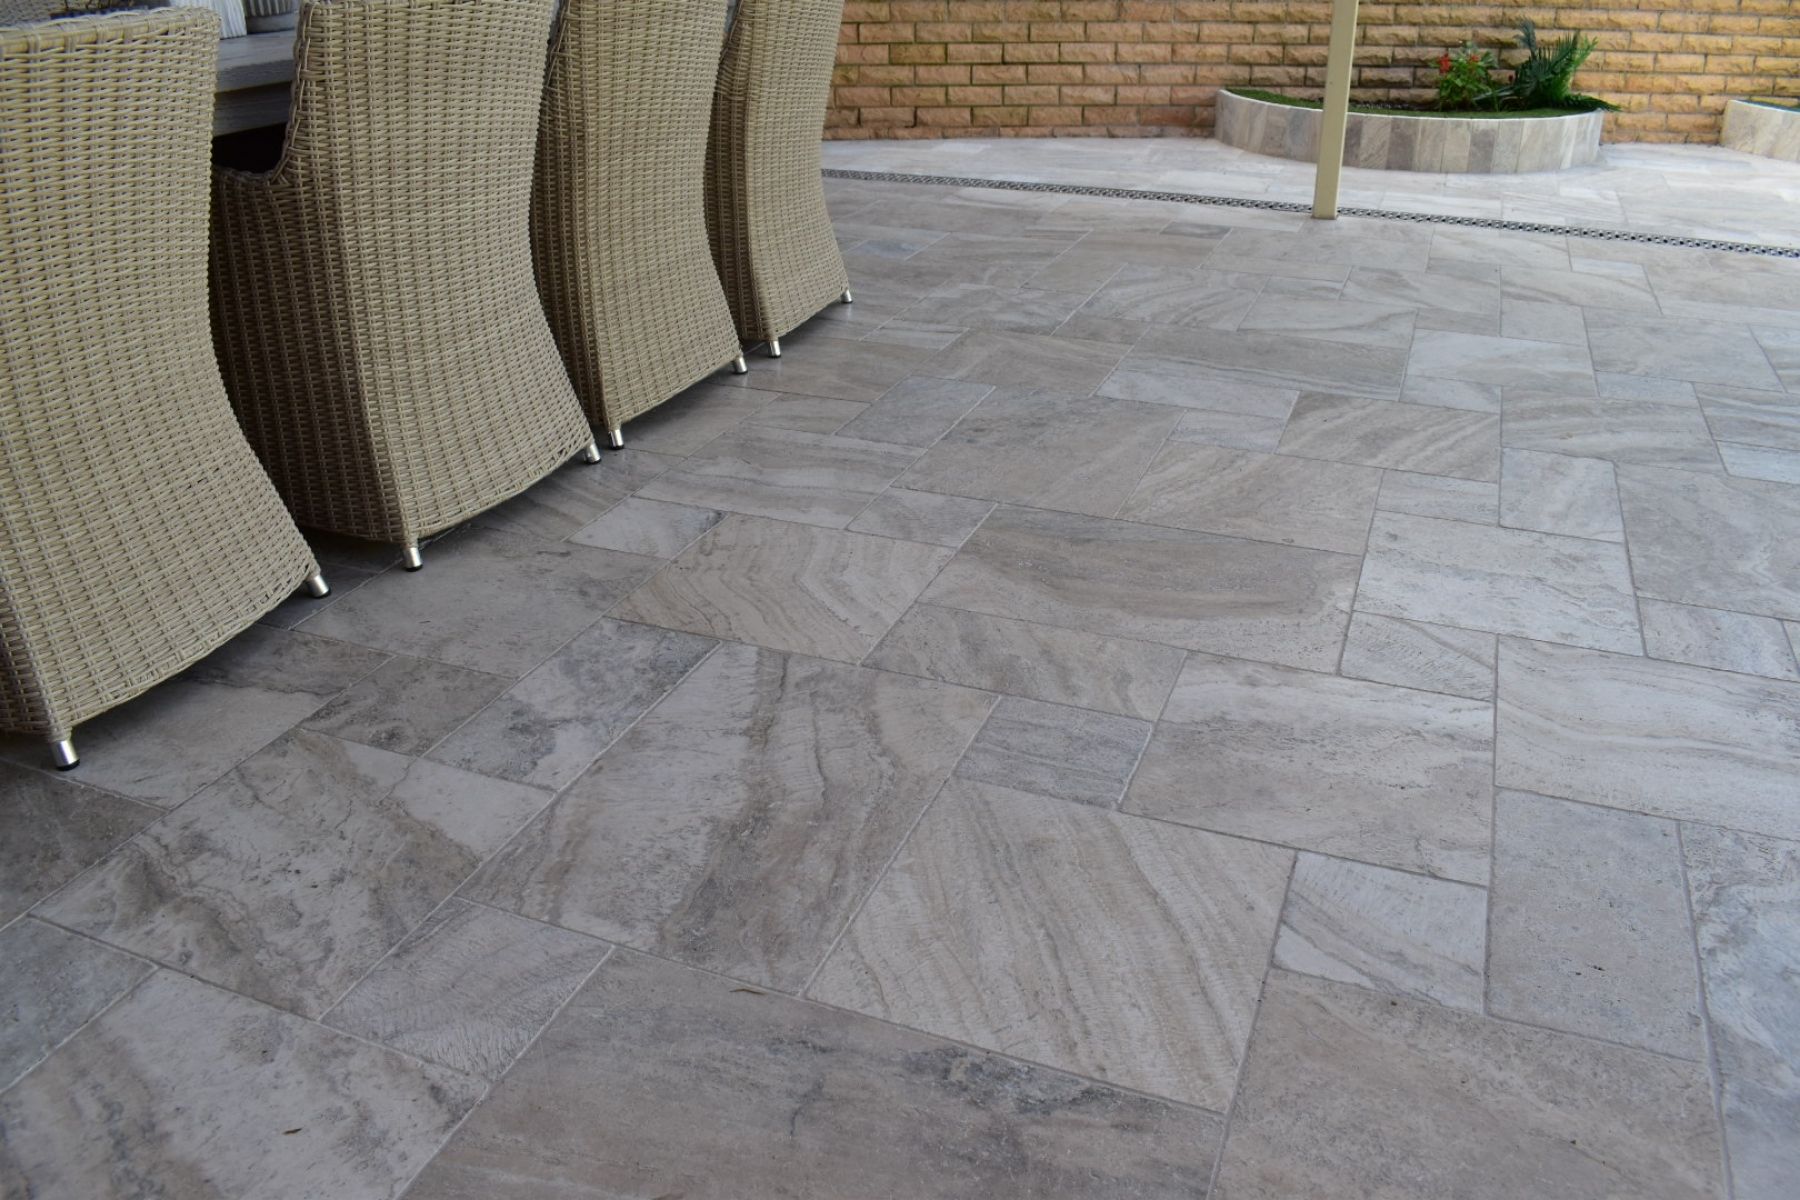 patio travertine used under patio with dining table and chairs